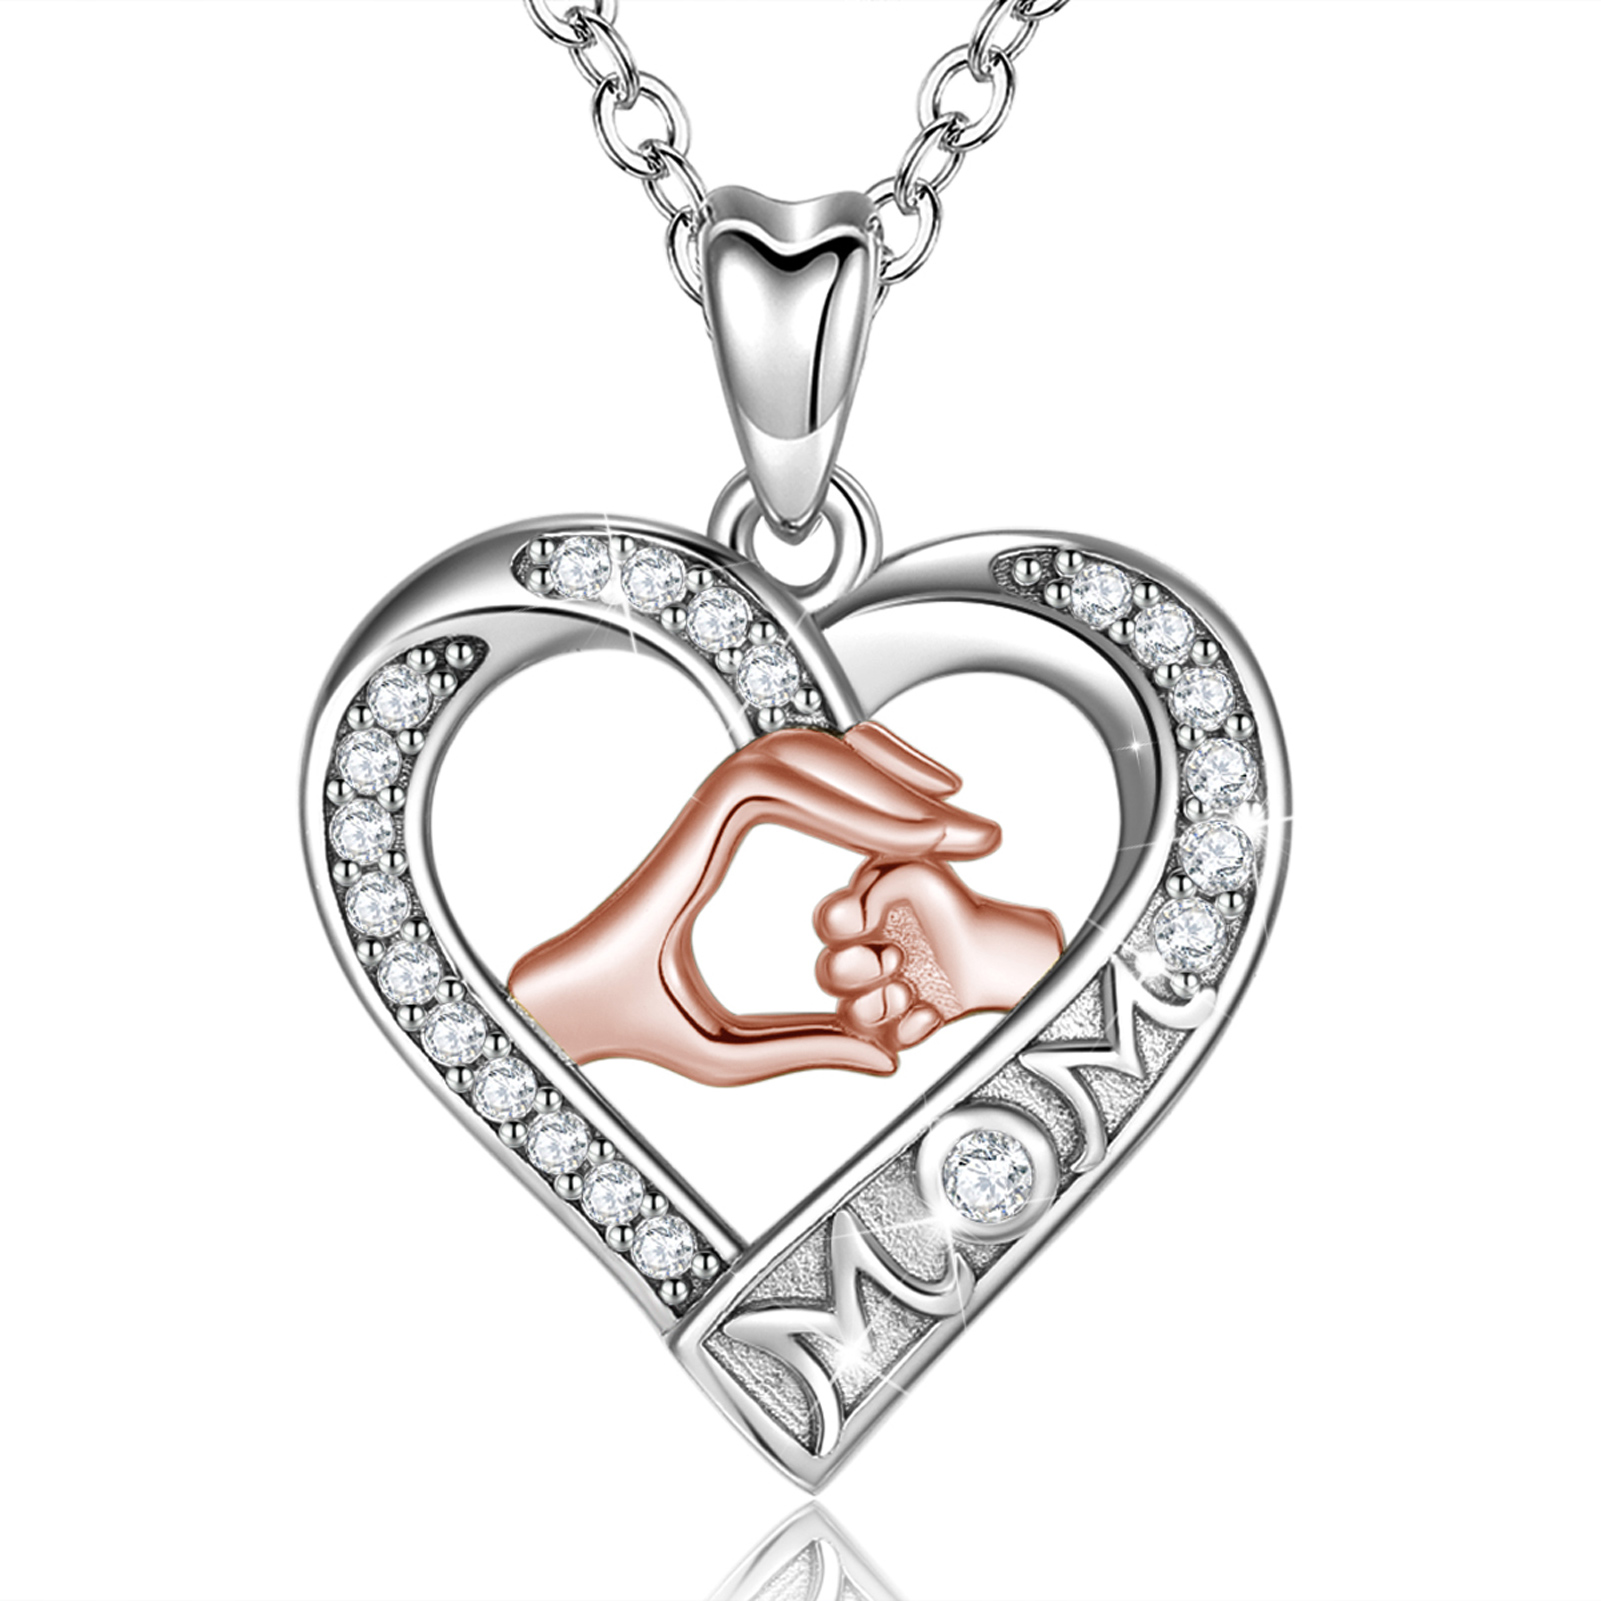 Merryshine Jewelry Mom and Baby's Hand White Gold Heart Shape S925 Sterling Silver Necklace for Ladies Gift